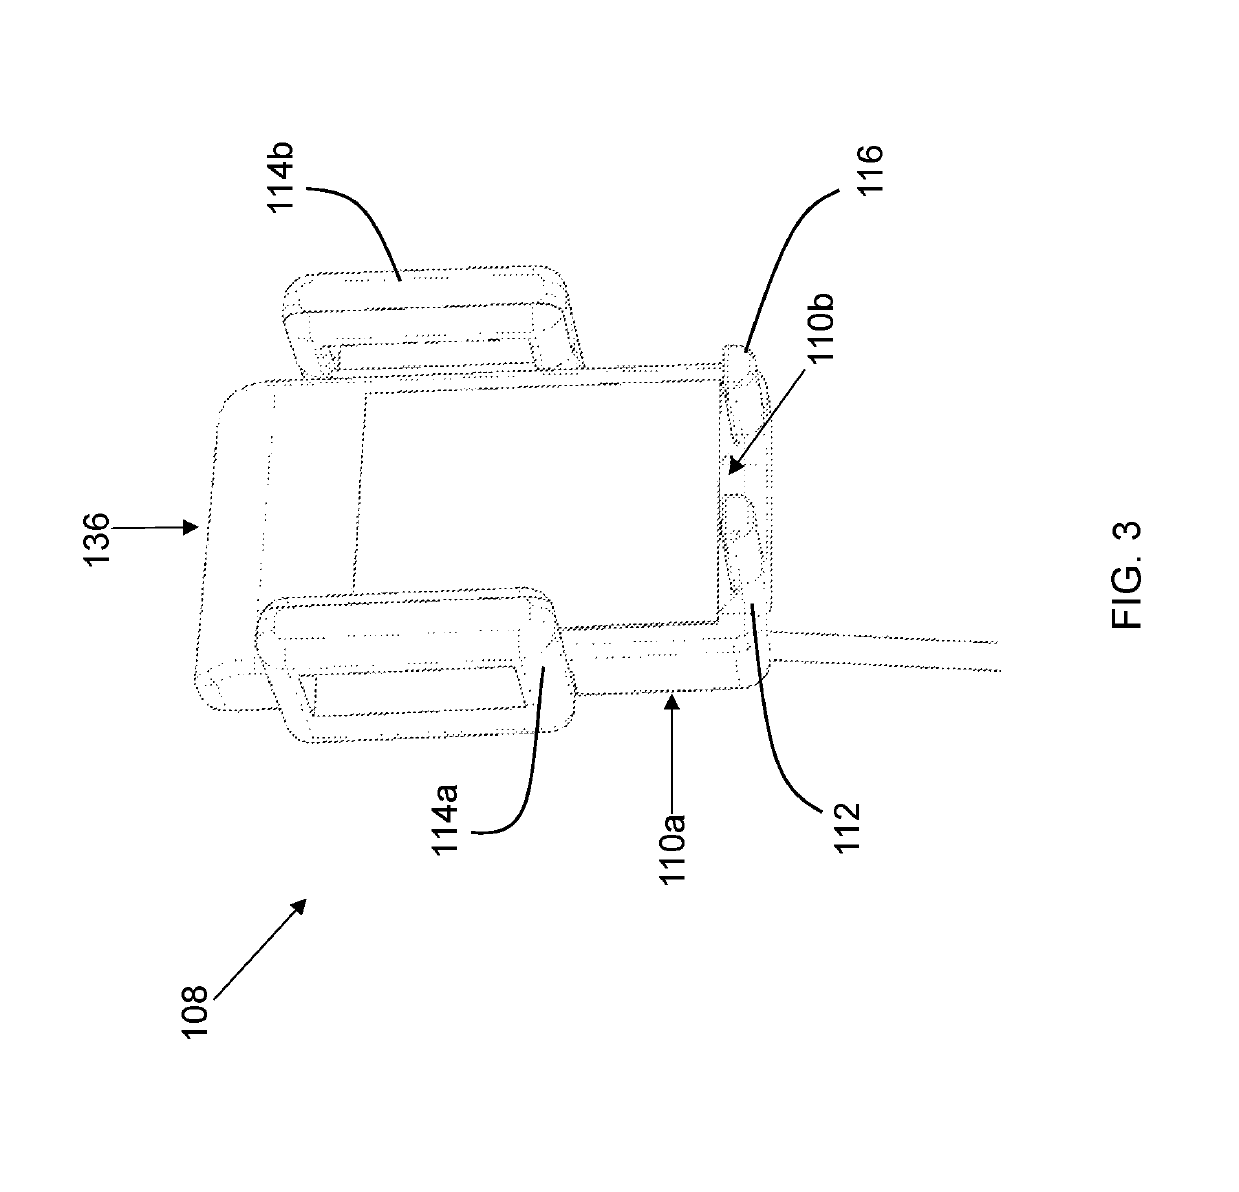 Waist-attachable mounting assembly for communication device